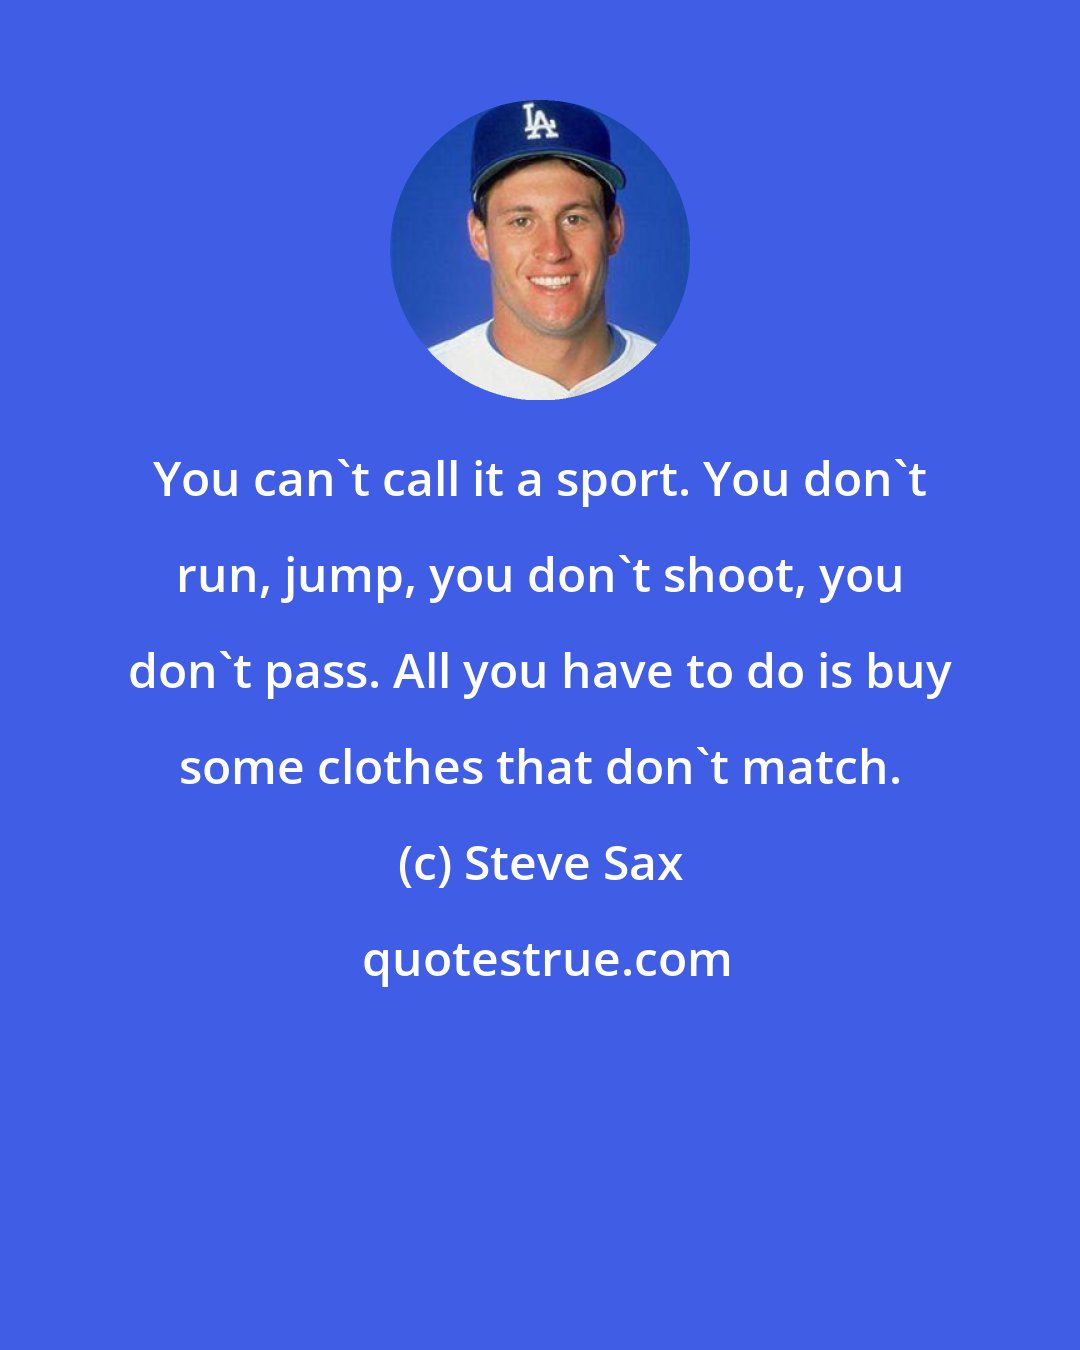 Steve Sax: You can't call it a sport. You don't run, jump, you don't shoot, you don't pass. All you have to do is buy some clothes that don't match.